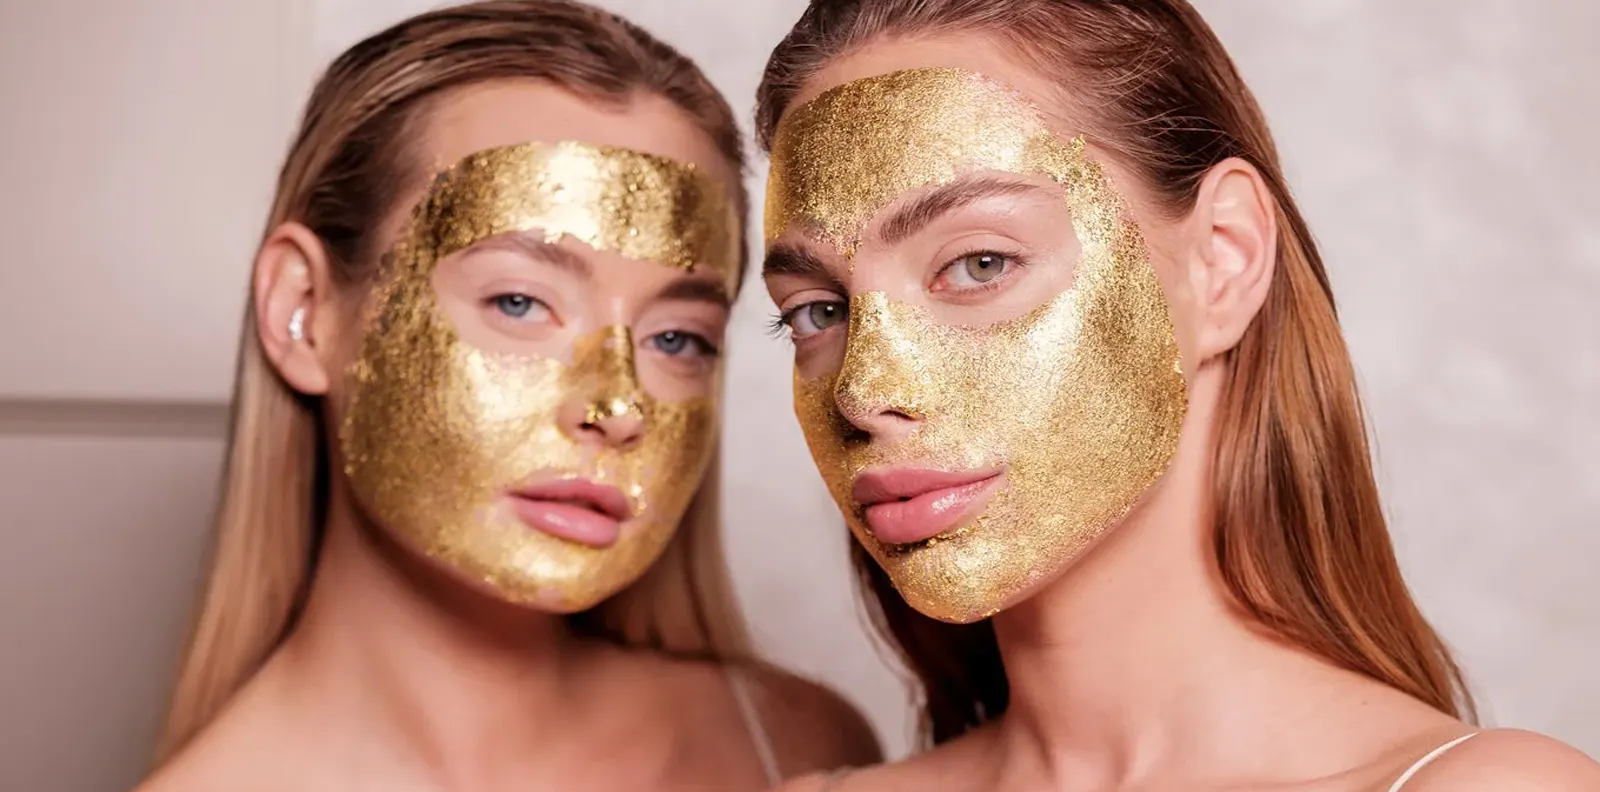 INFUSIA UNE COLLECTION SKINCARE EN OR 24 K INFUSIA, UNE COLLECTION SKINCARE EN OR 24 K